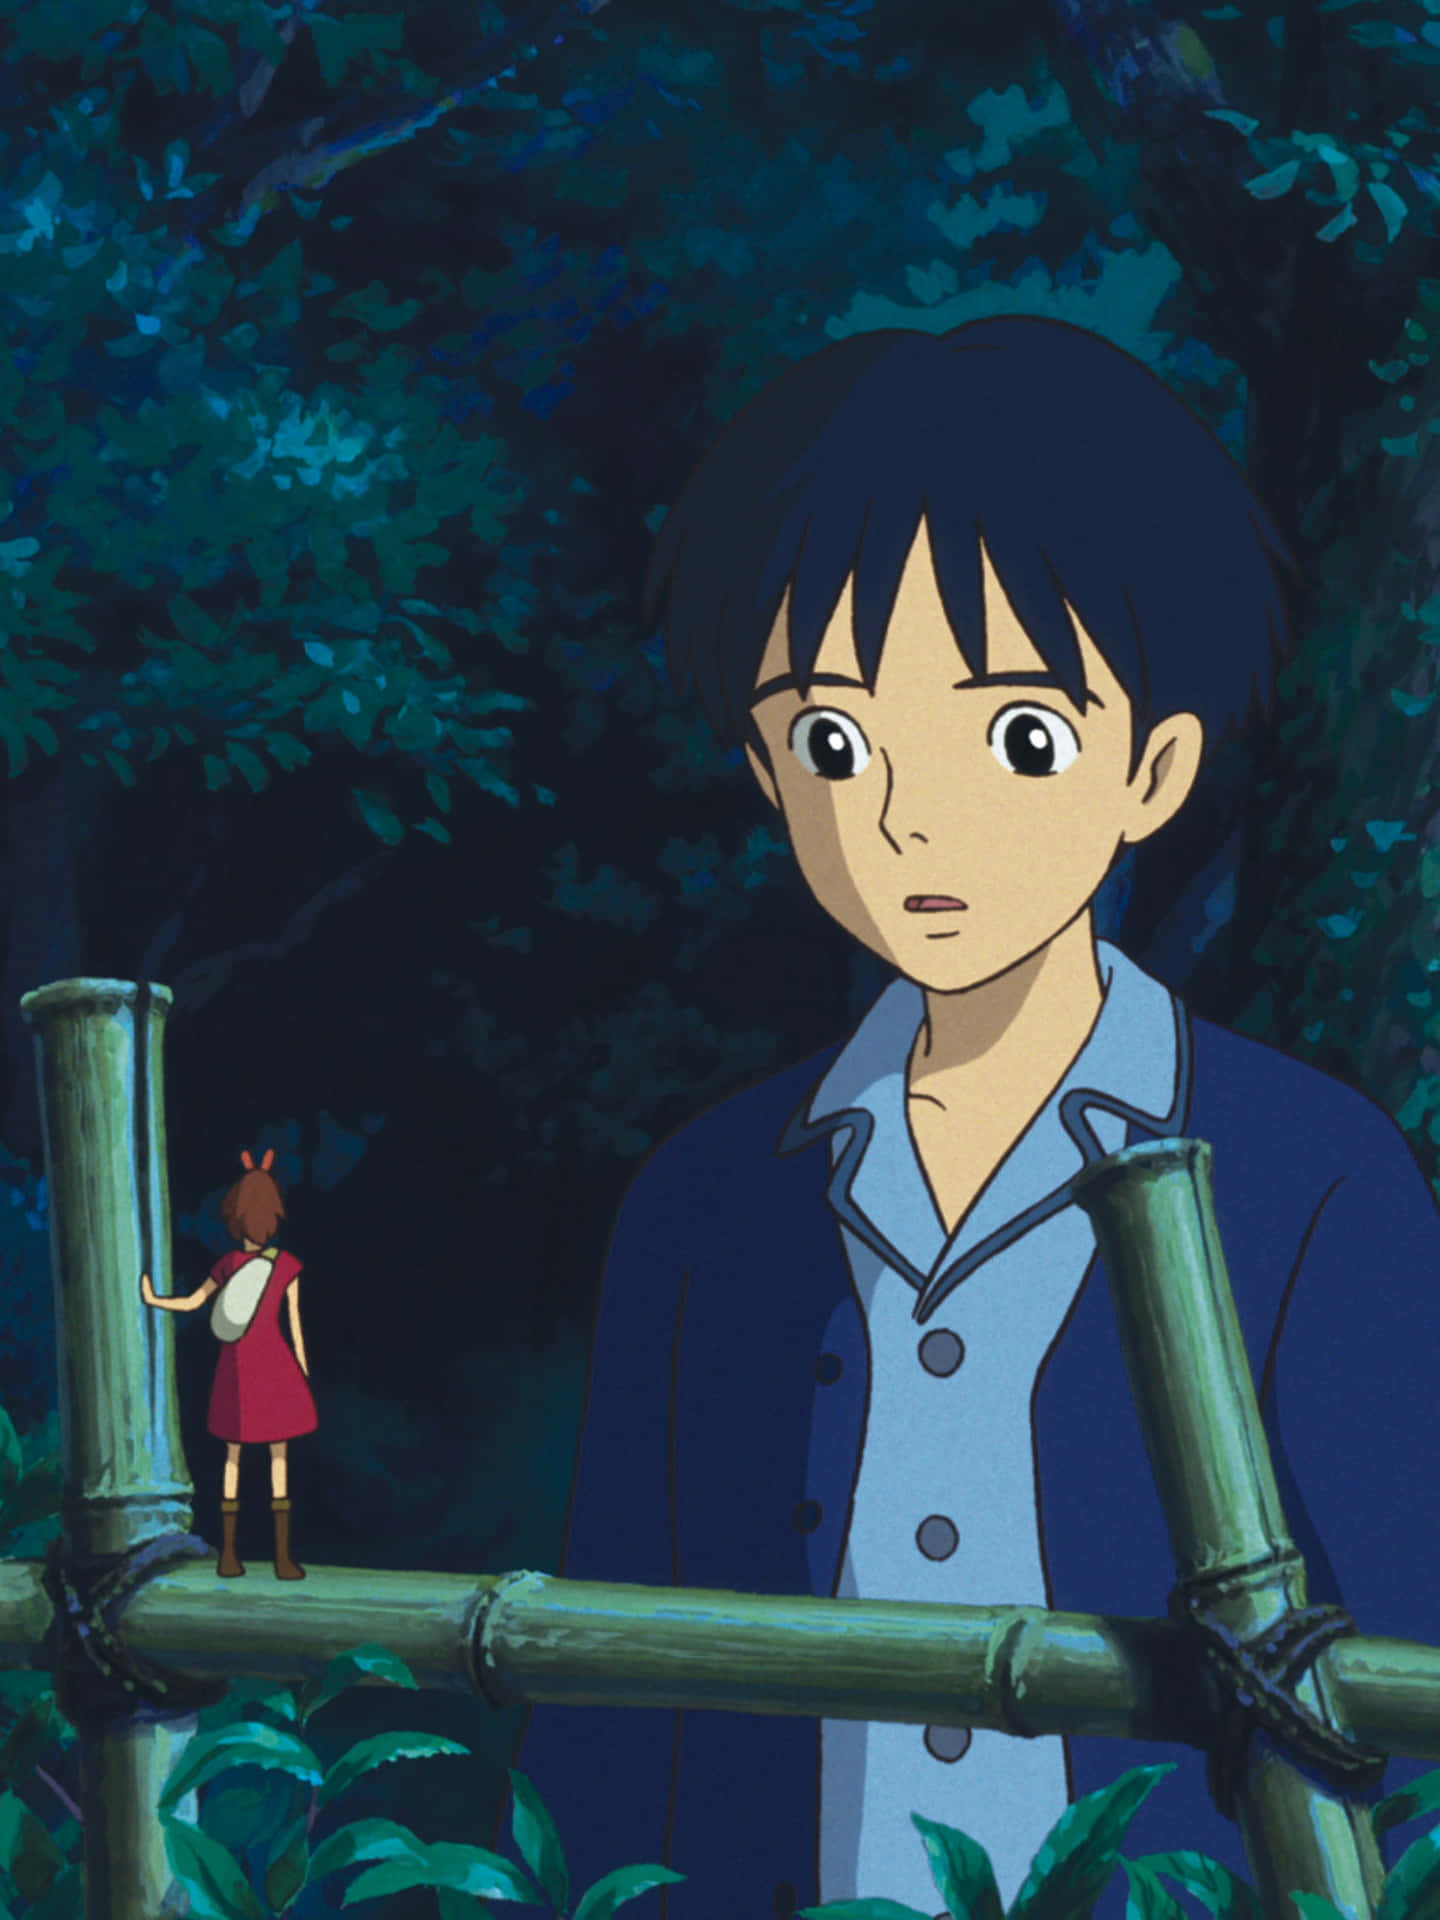 Caption: Arrietty and her family, the tiny Borrowers who live hidden beneath the floorboards, exploring the human world. Wallpaper